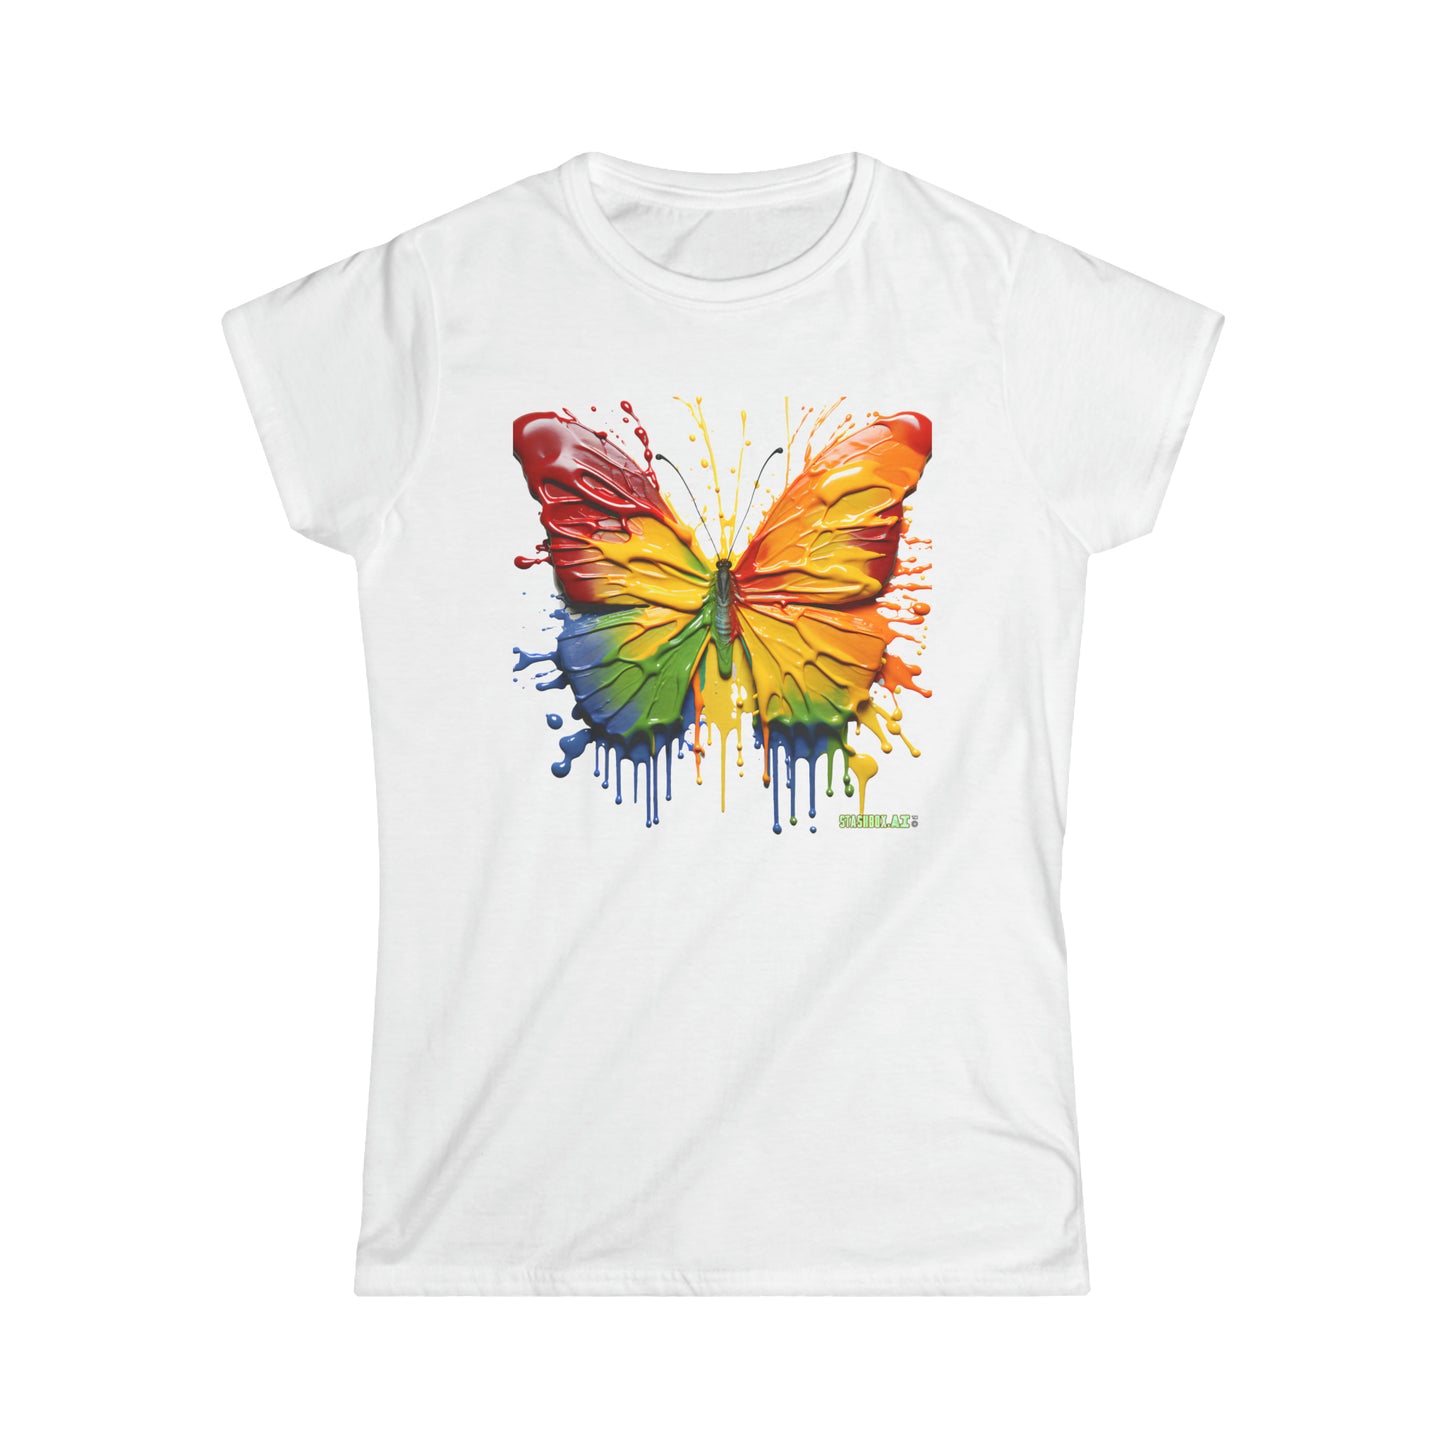 Women's Softstyle Tee - Colorful Butterfly 003